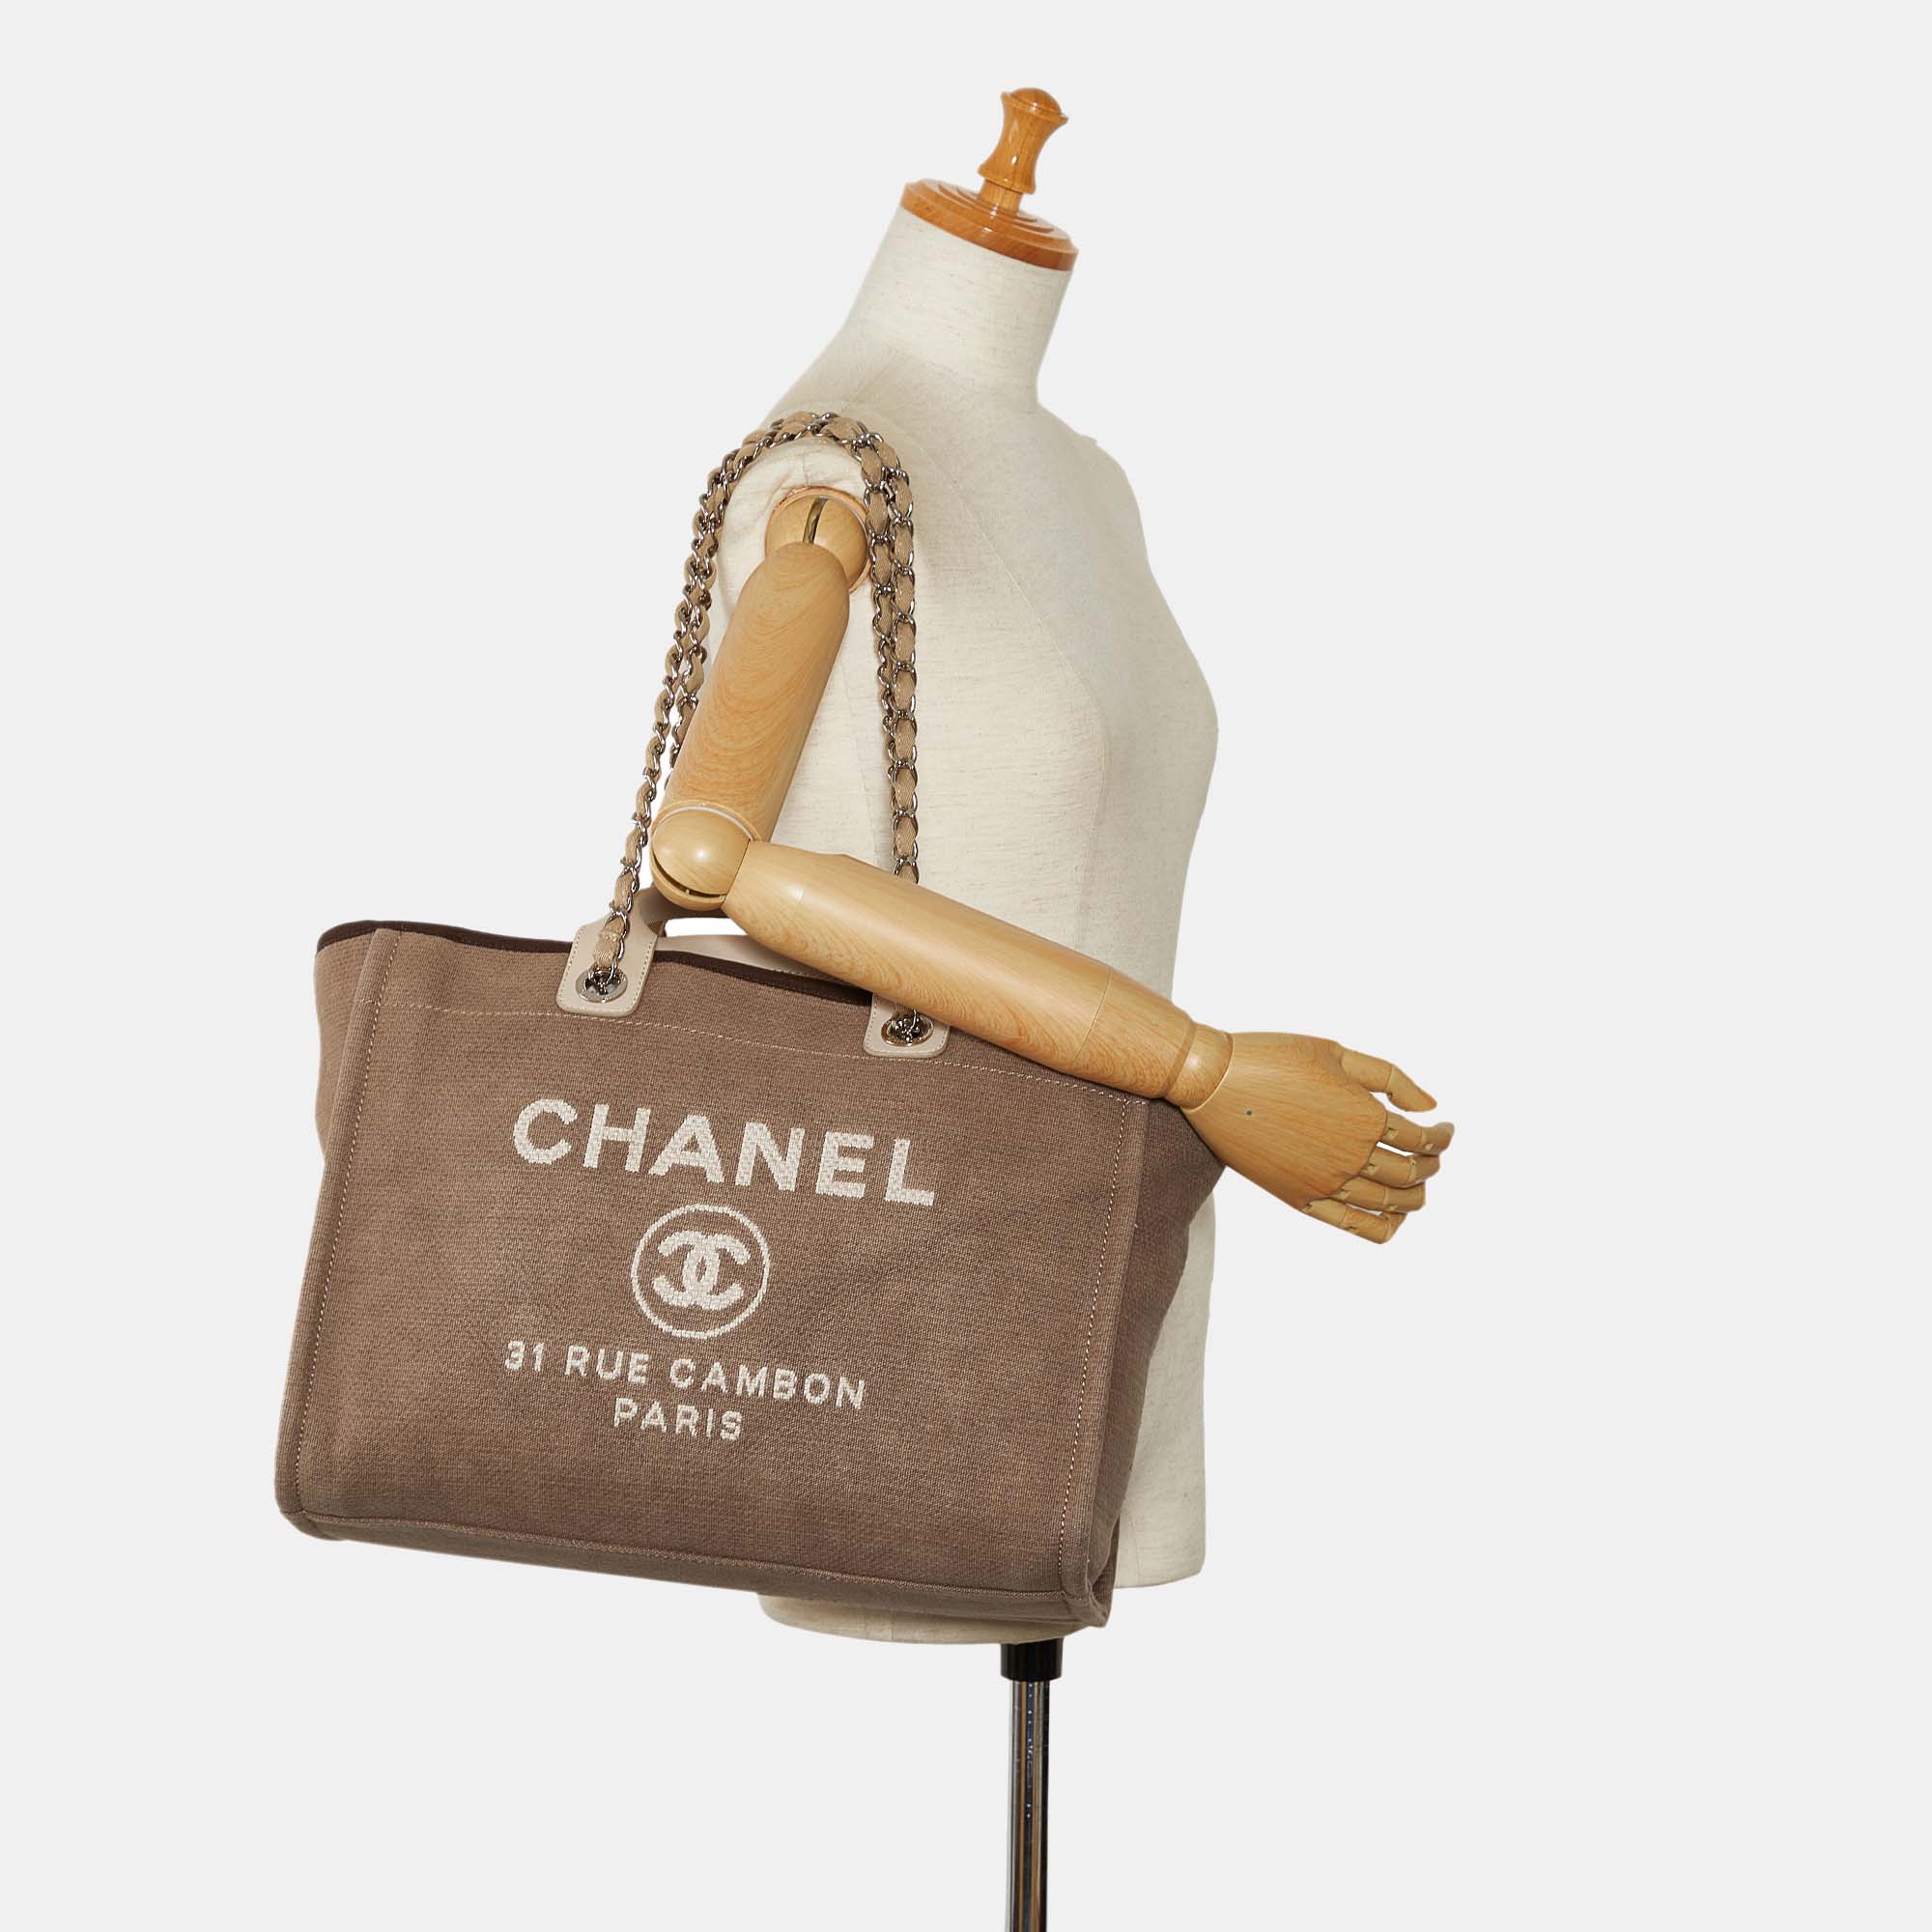 Chanel Large Deauville Shopping Tote